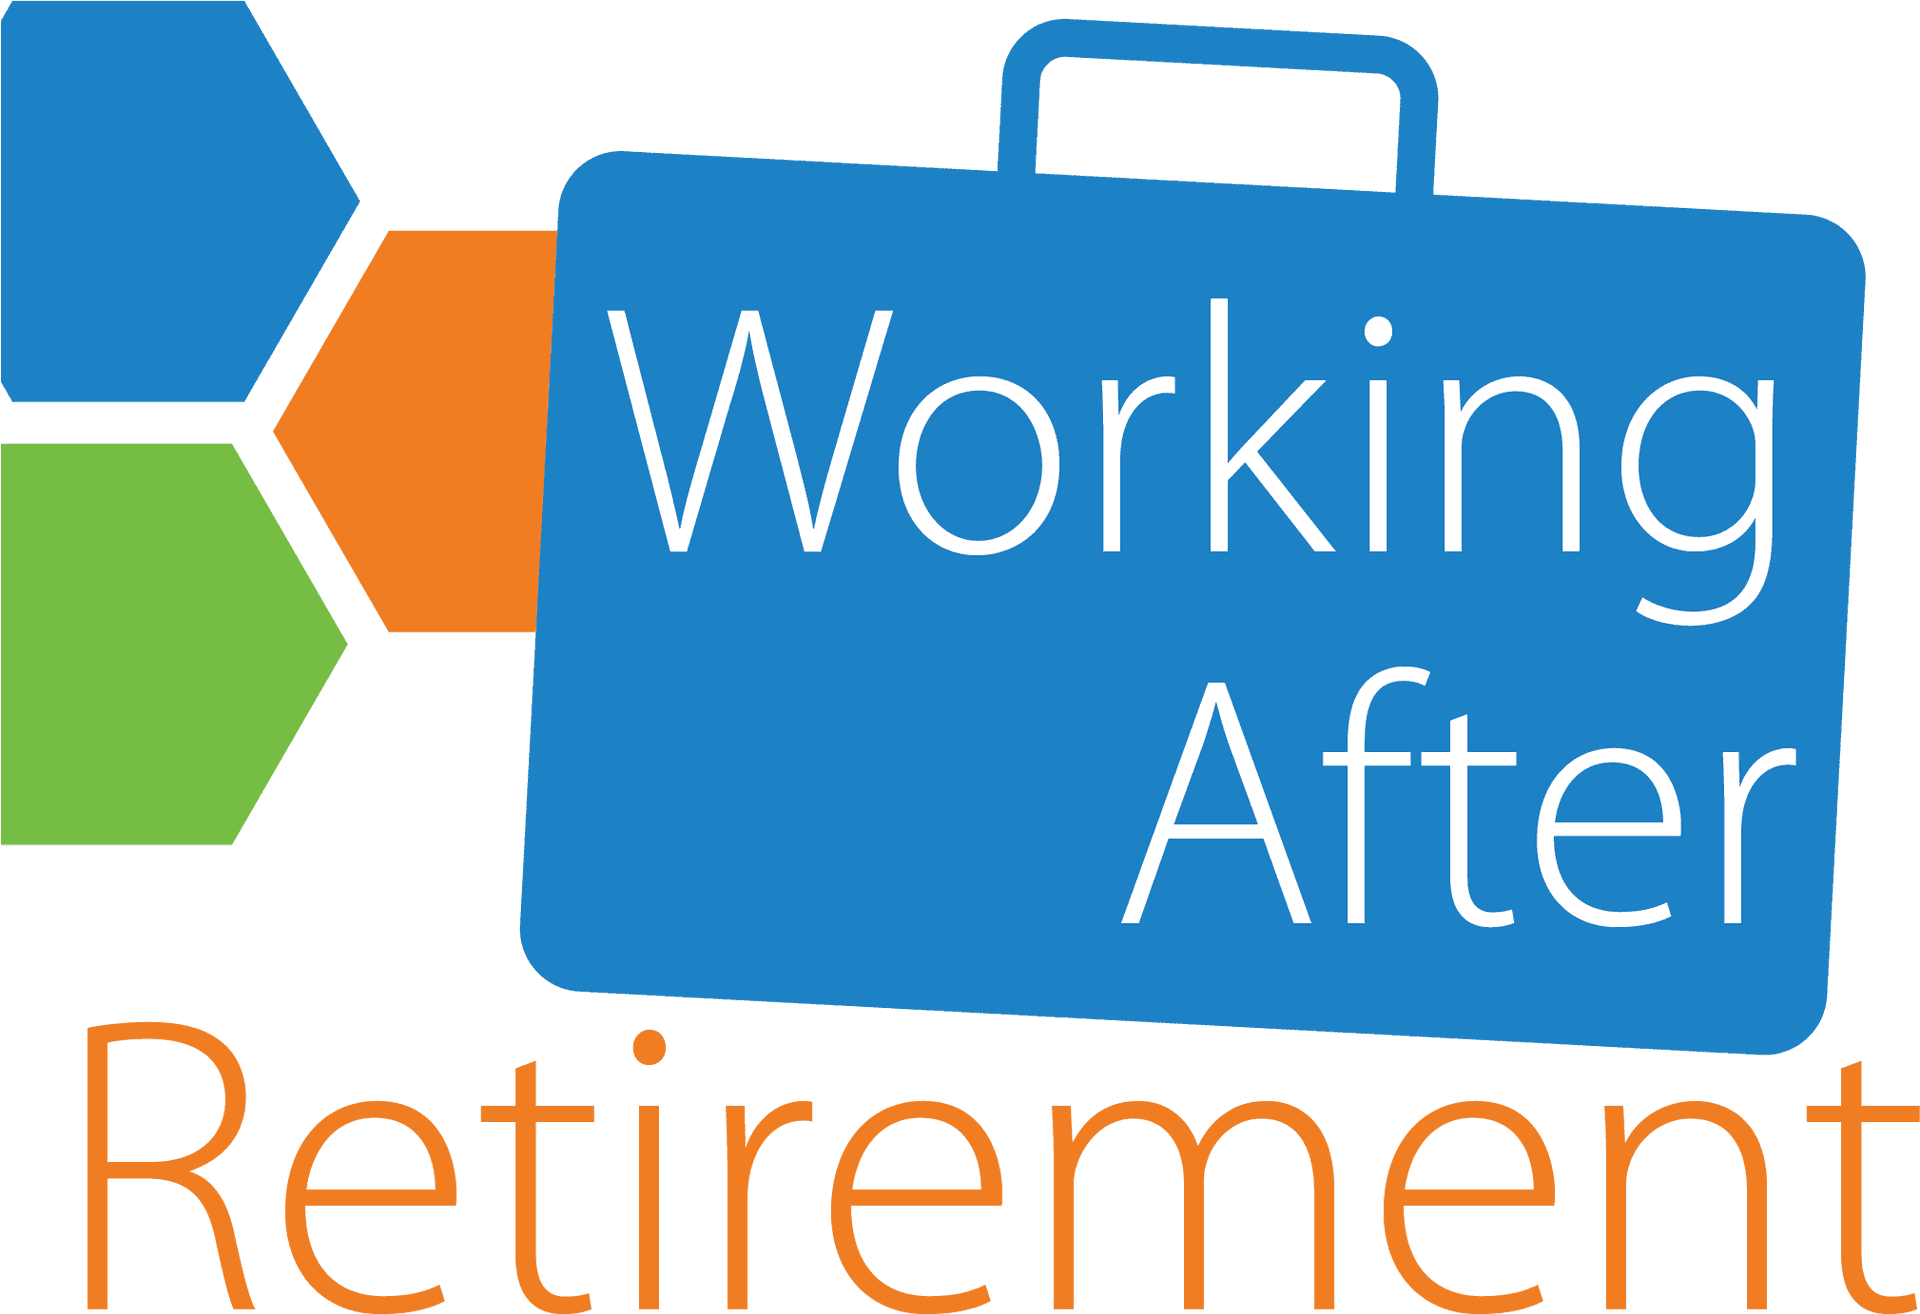 Working After Retirement Concept PNG image